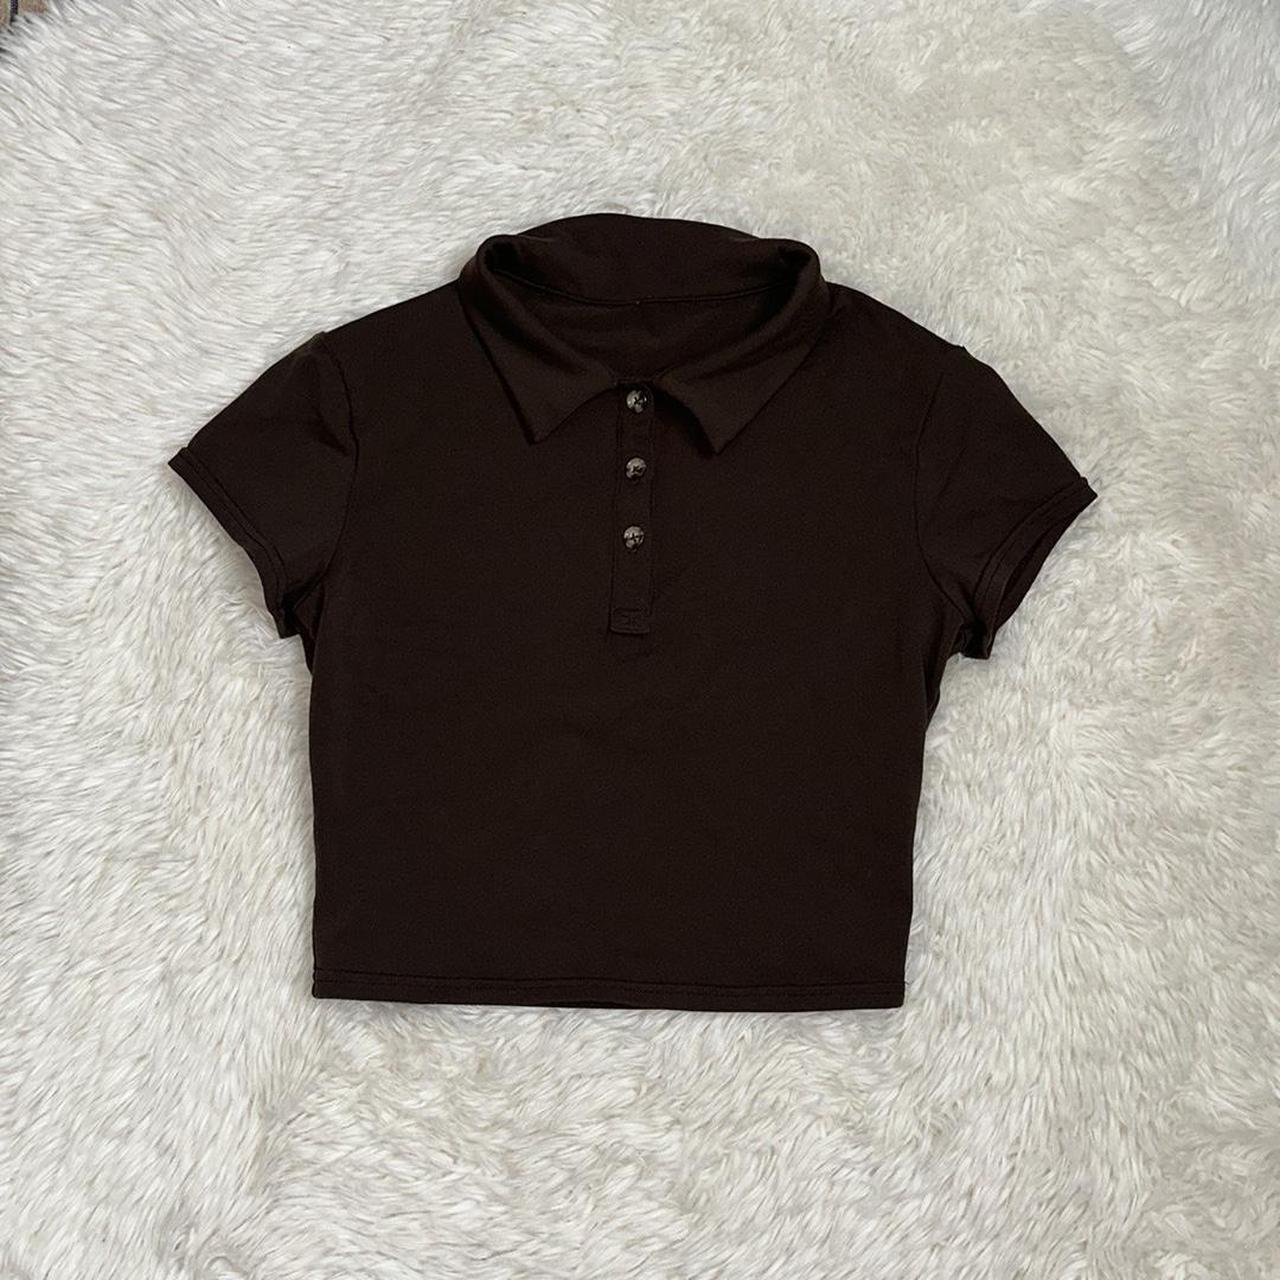 Gorgeous Alo top in espresso brown, never worn